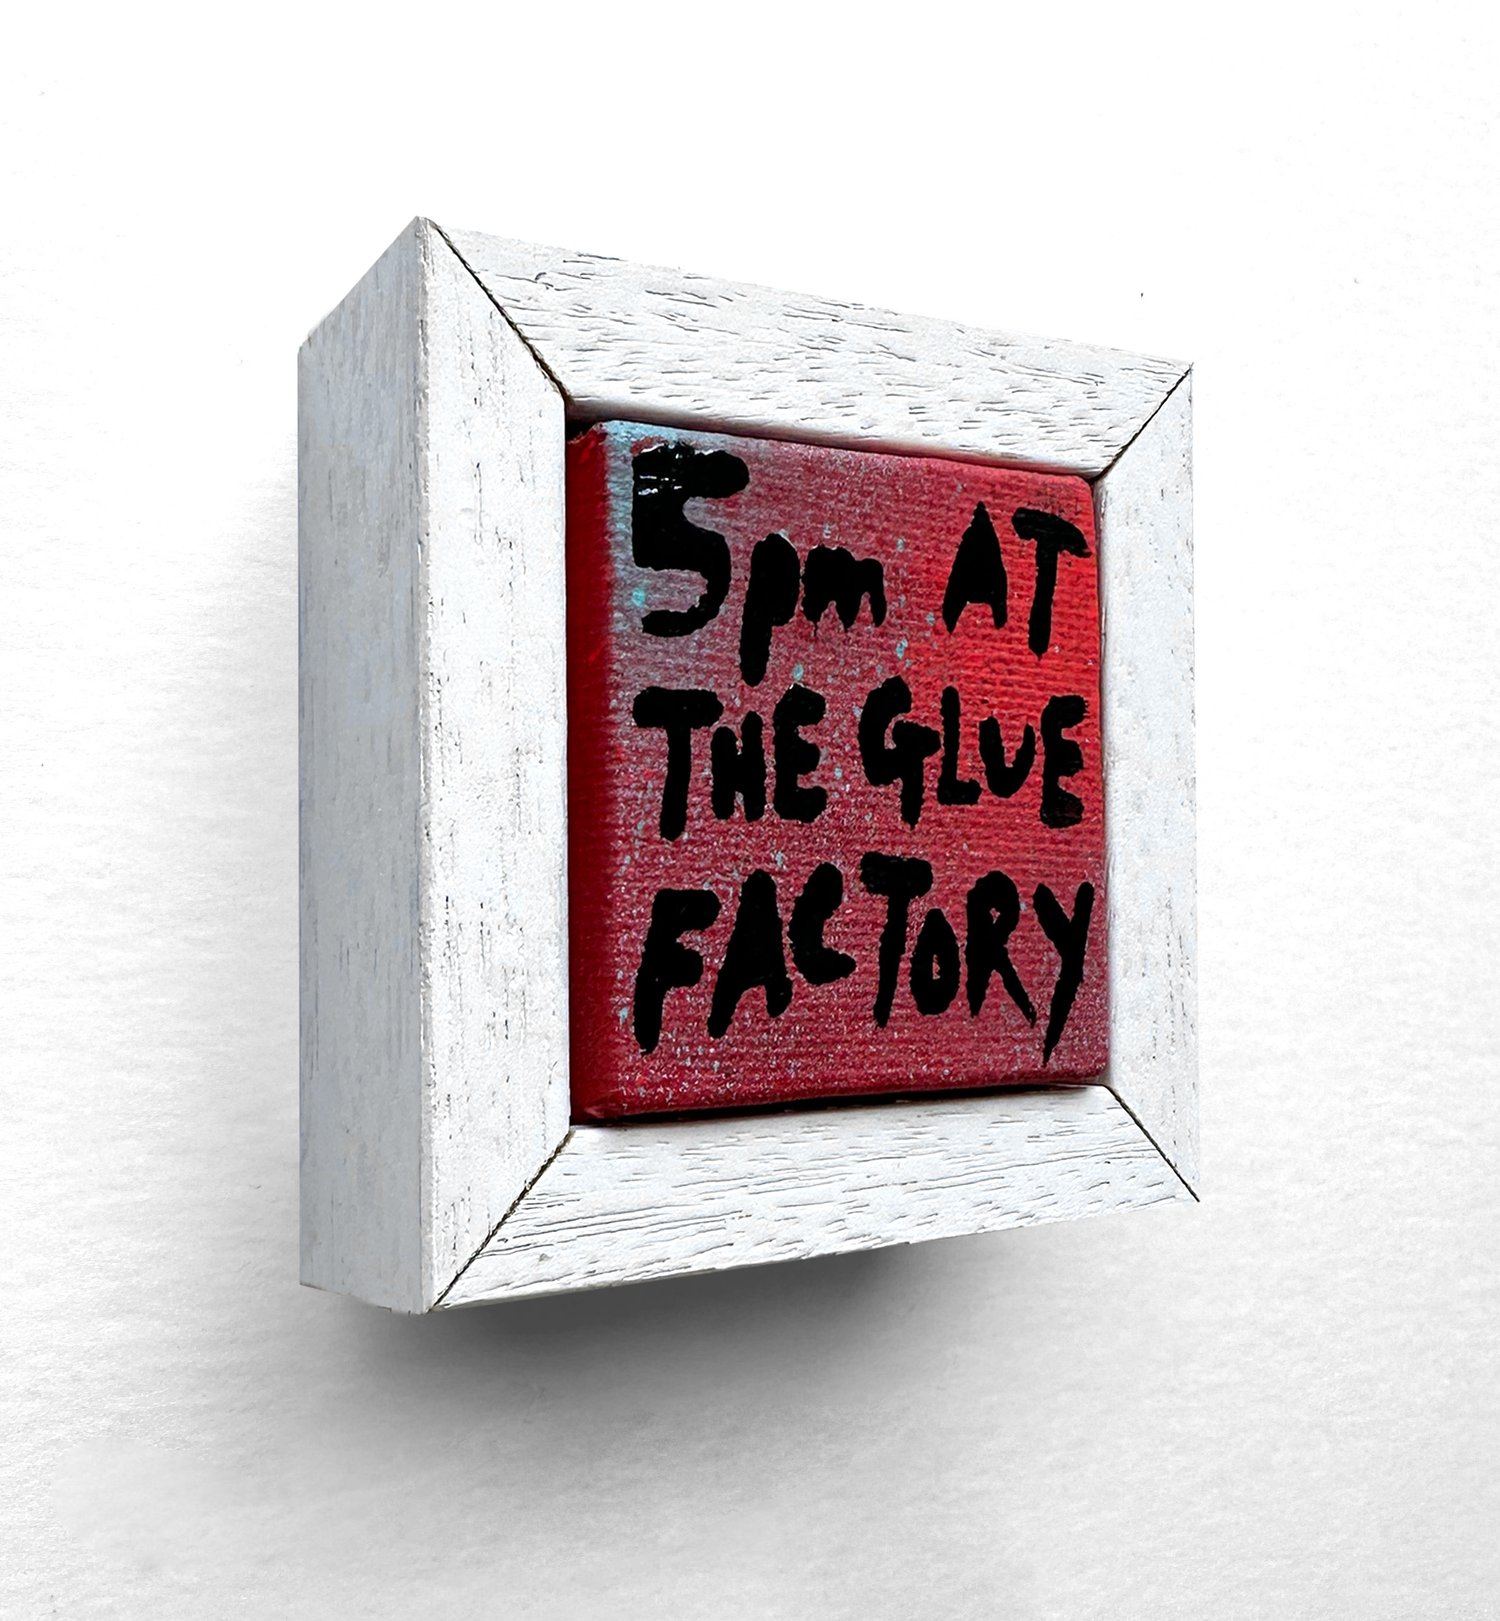 Image of ‘5PM at the Glue Factory’ by EDWIN